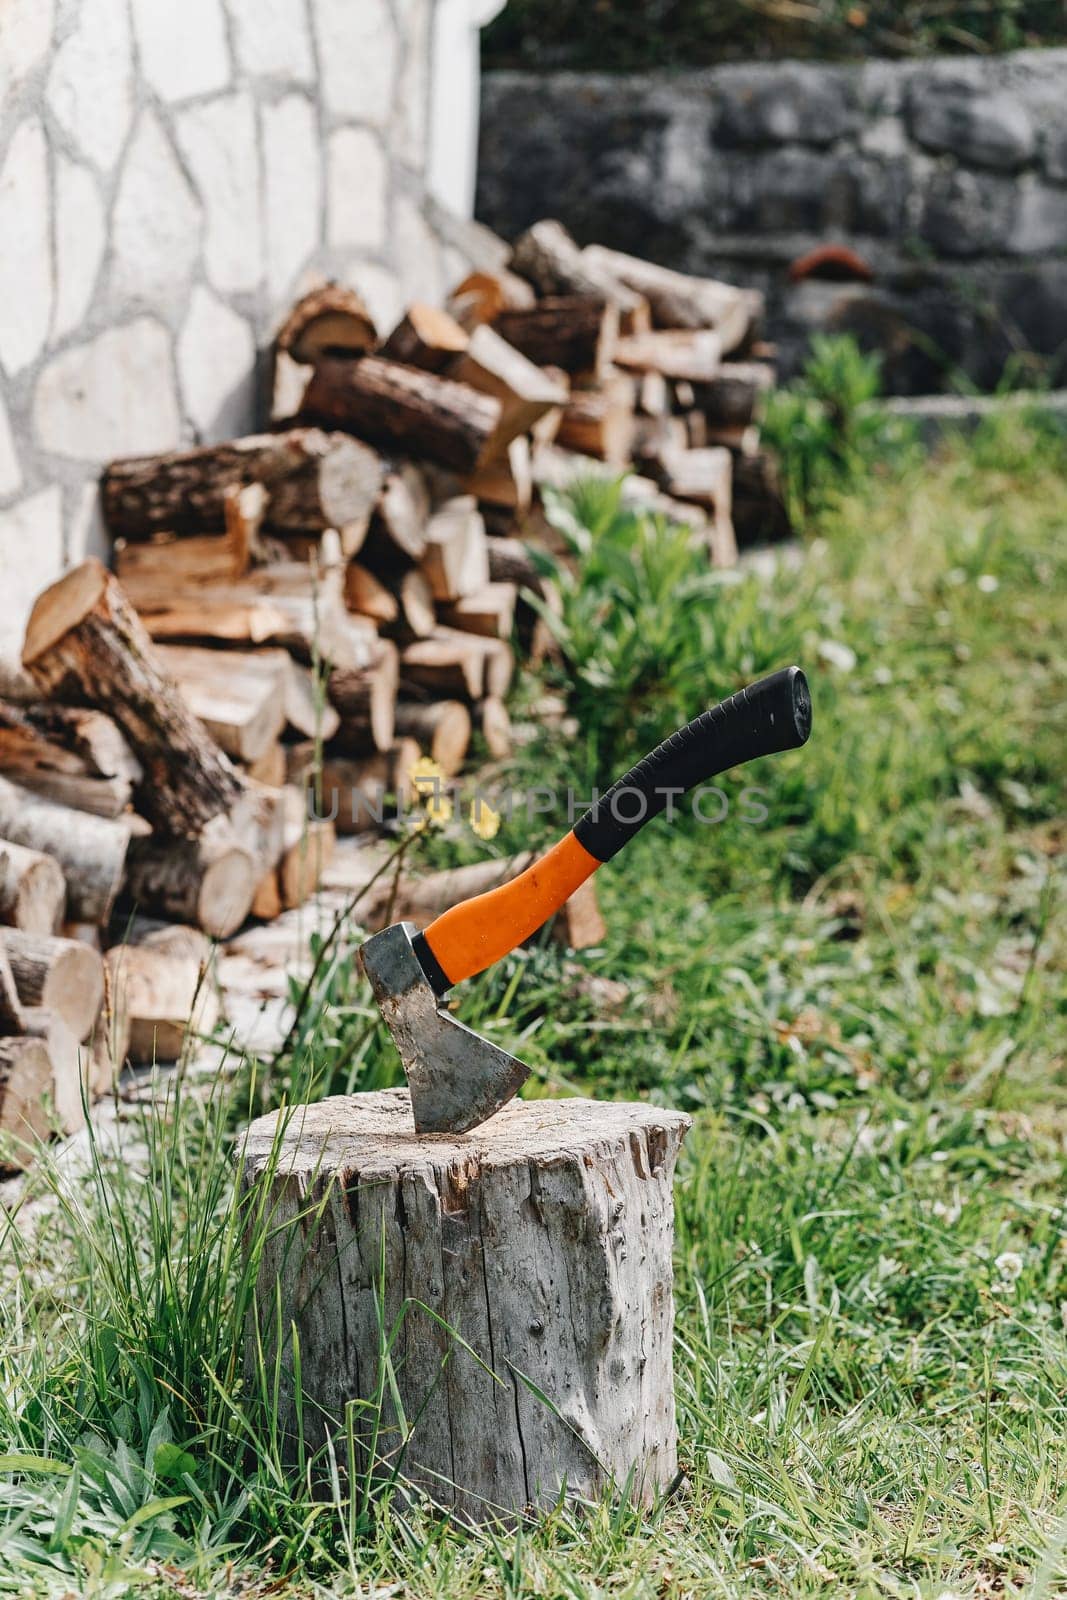 Axe with orange handle for the crib logs sticks sticking out in the tree amid the lie wood and green grass